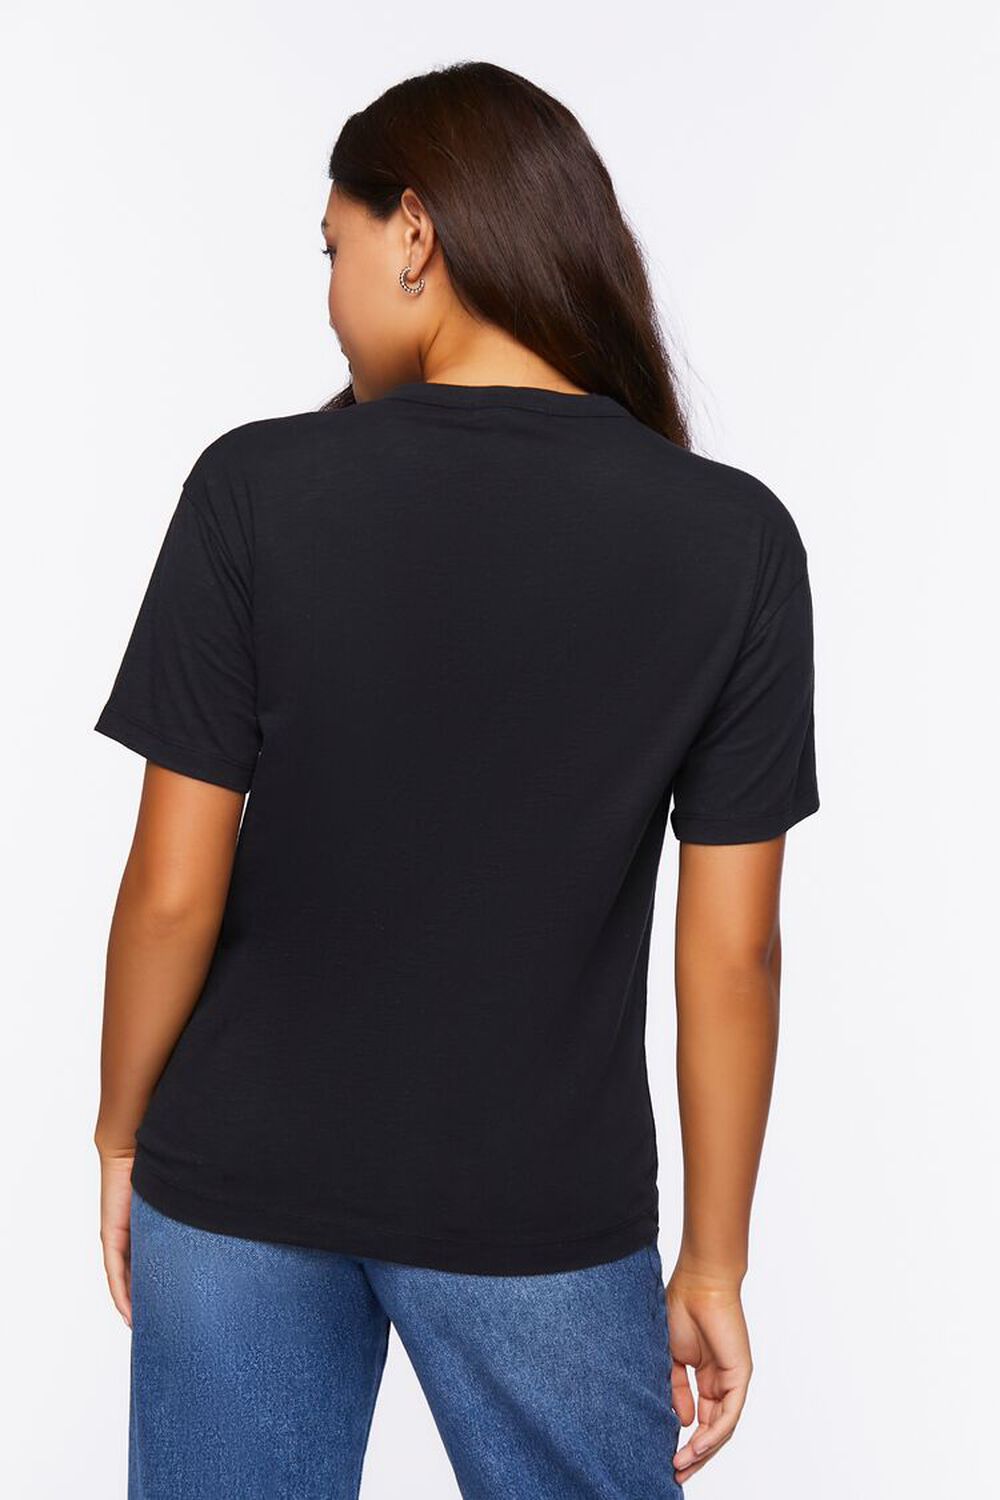 BLACK Relaxed Crew Tee, image 3